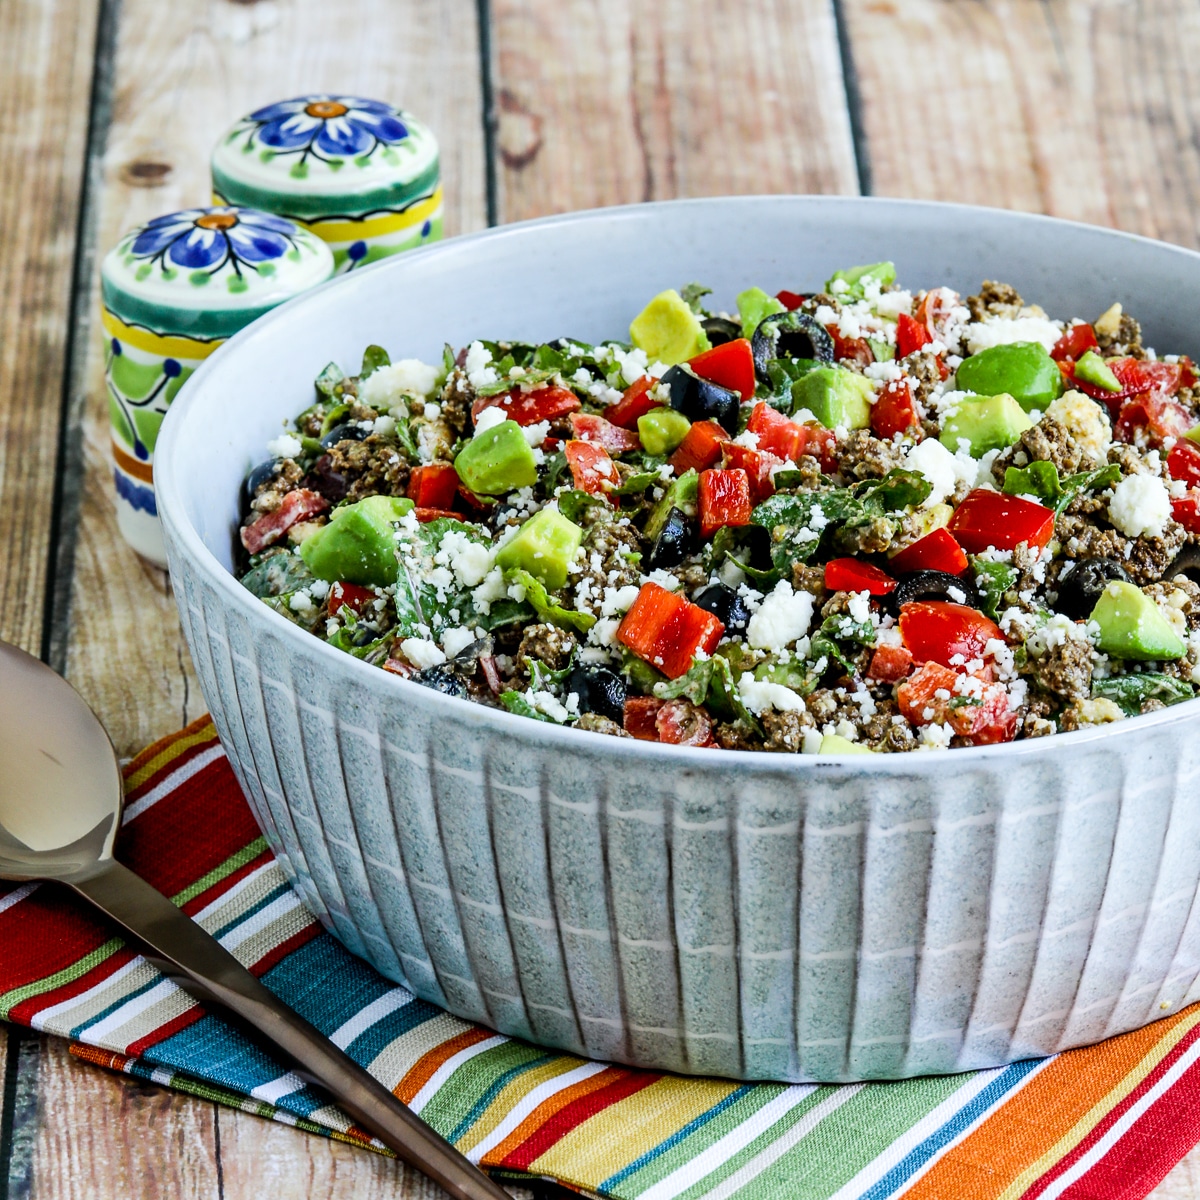 Square image of ground beef taco salad with kale, tomato and avocado in a serving bowl.